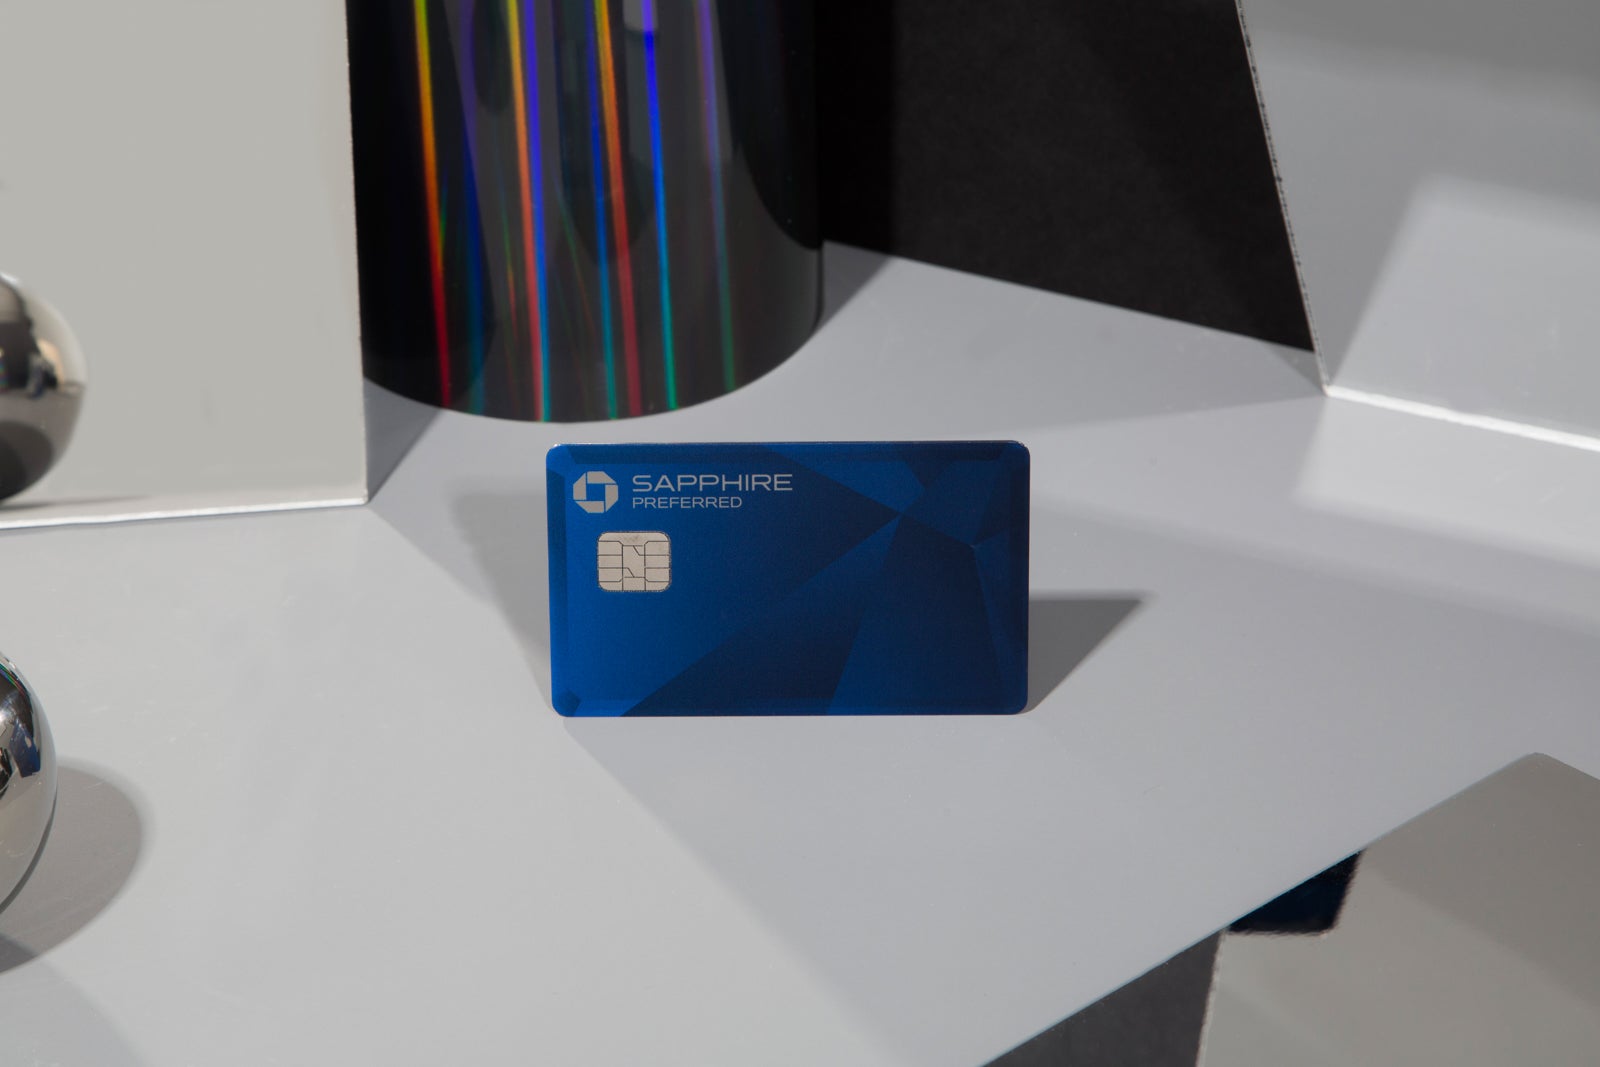 Get the most out of Chase with these credit cards in April 2021